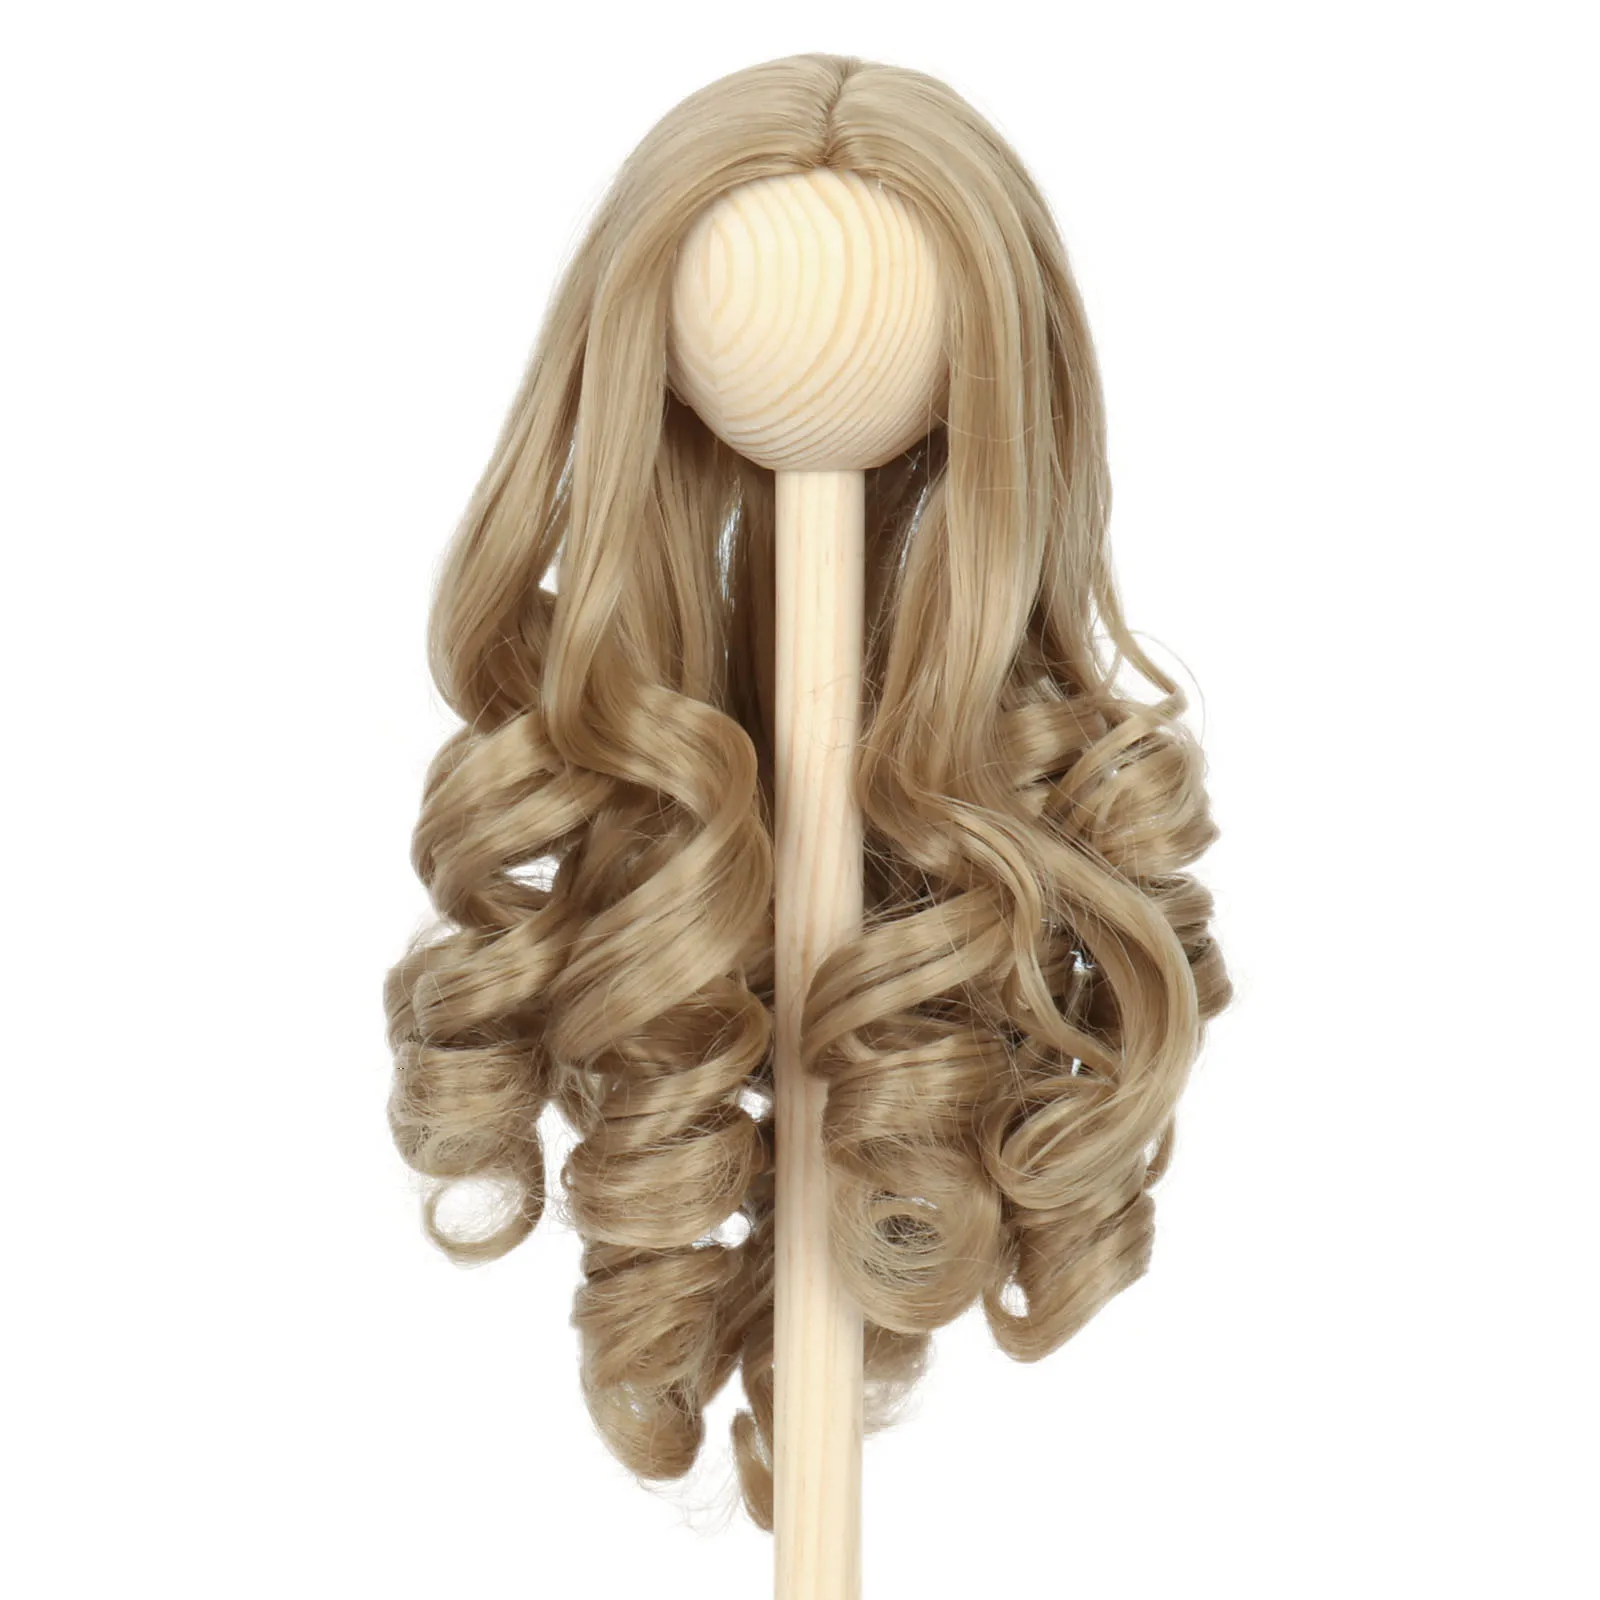 

8-9 Inch 1/3 BJD MSD DOD Pullip Dollfie Doll Wig Long Curly Hair Not for Human